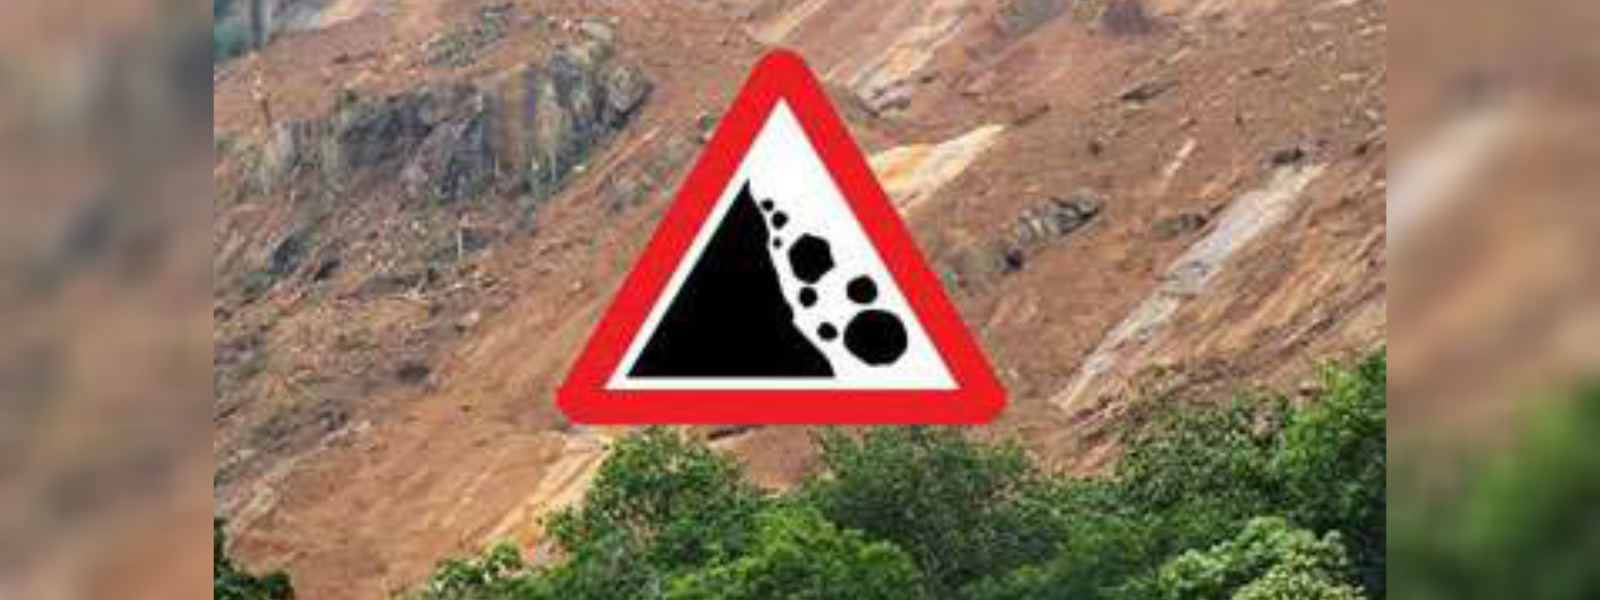 Early landslide warning issued to 3 districts